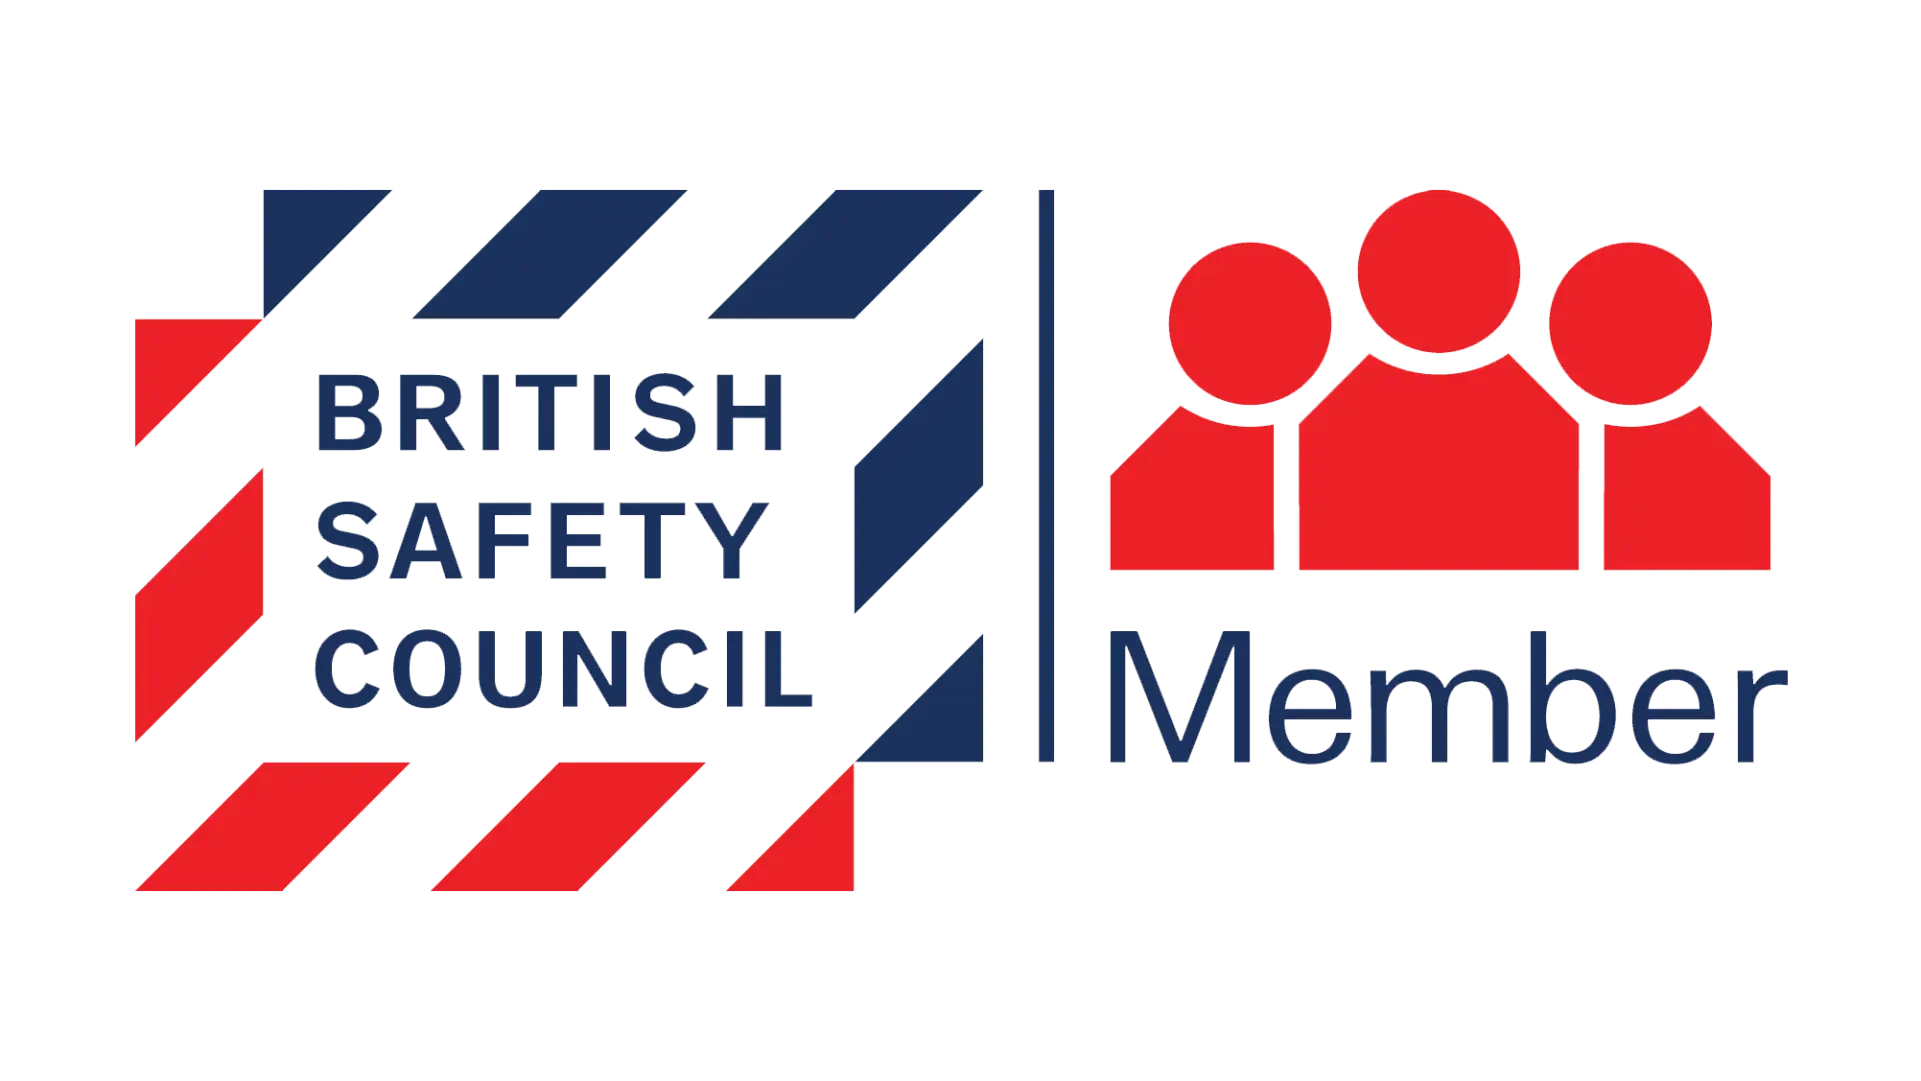 The British Safety Council Logo